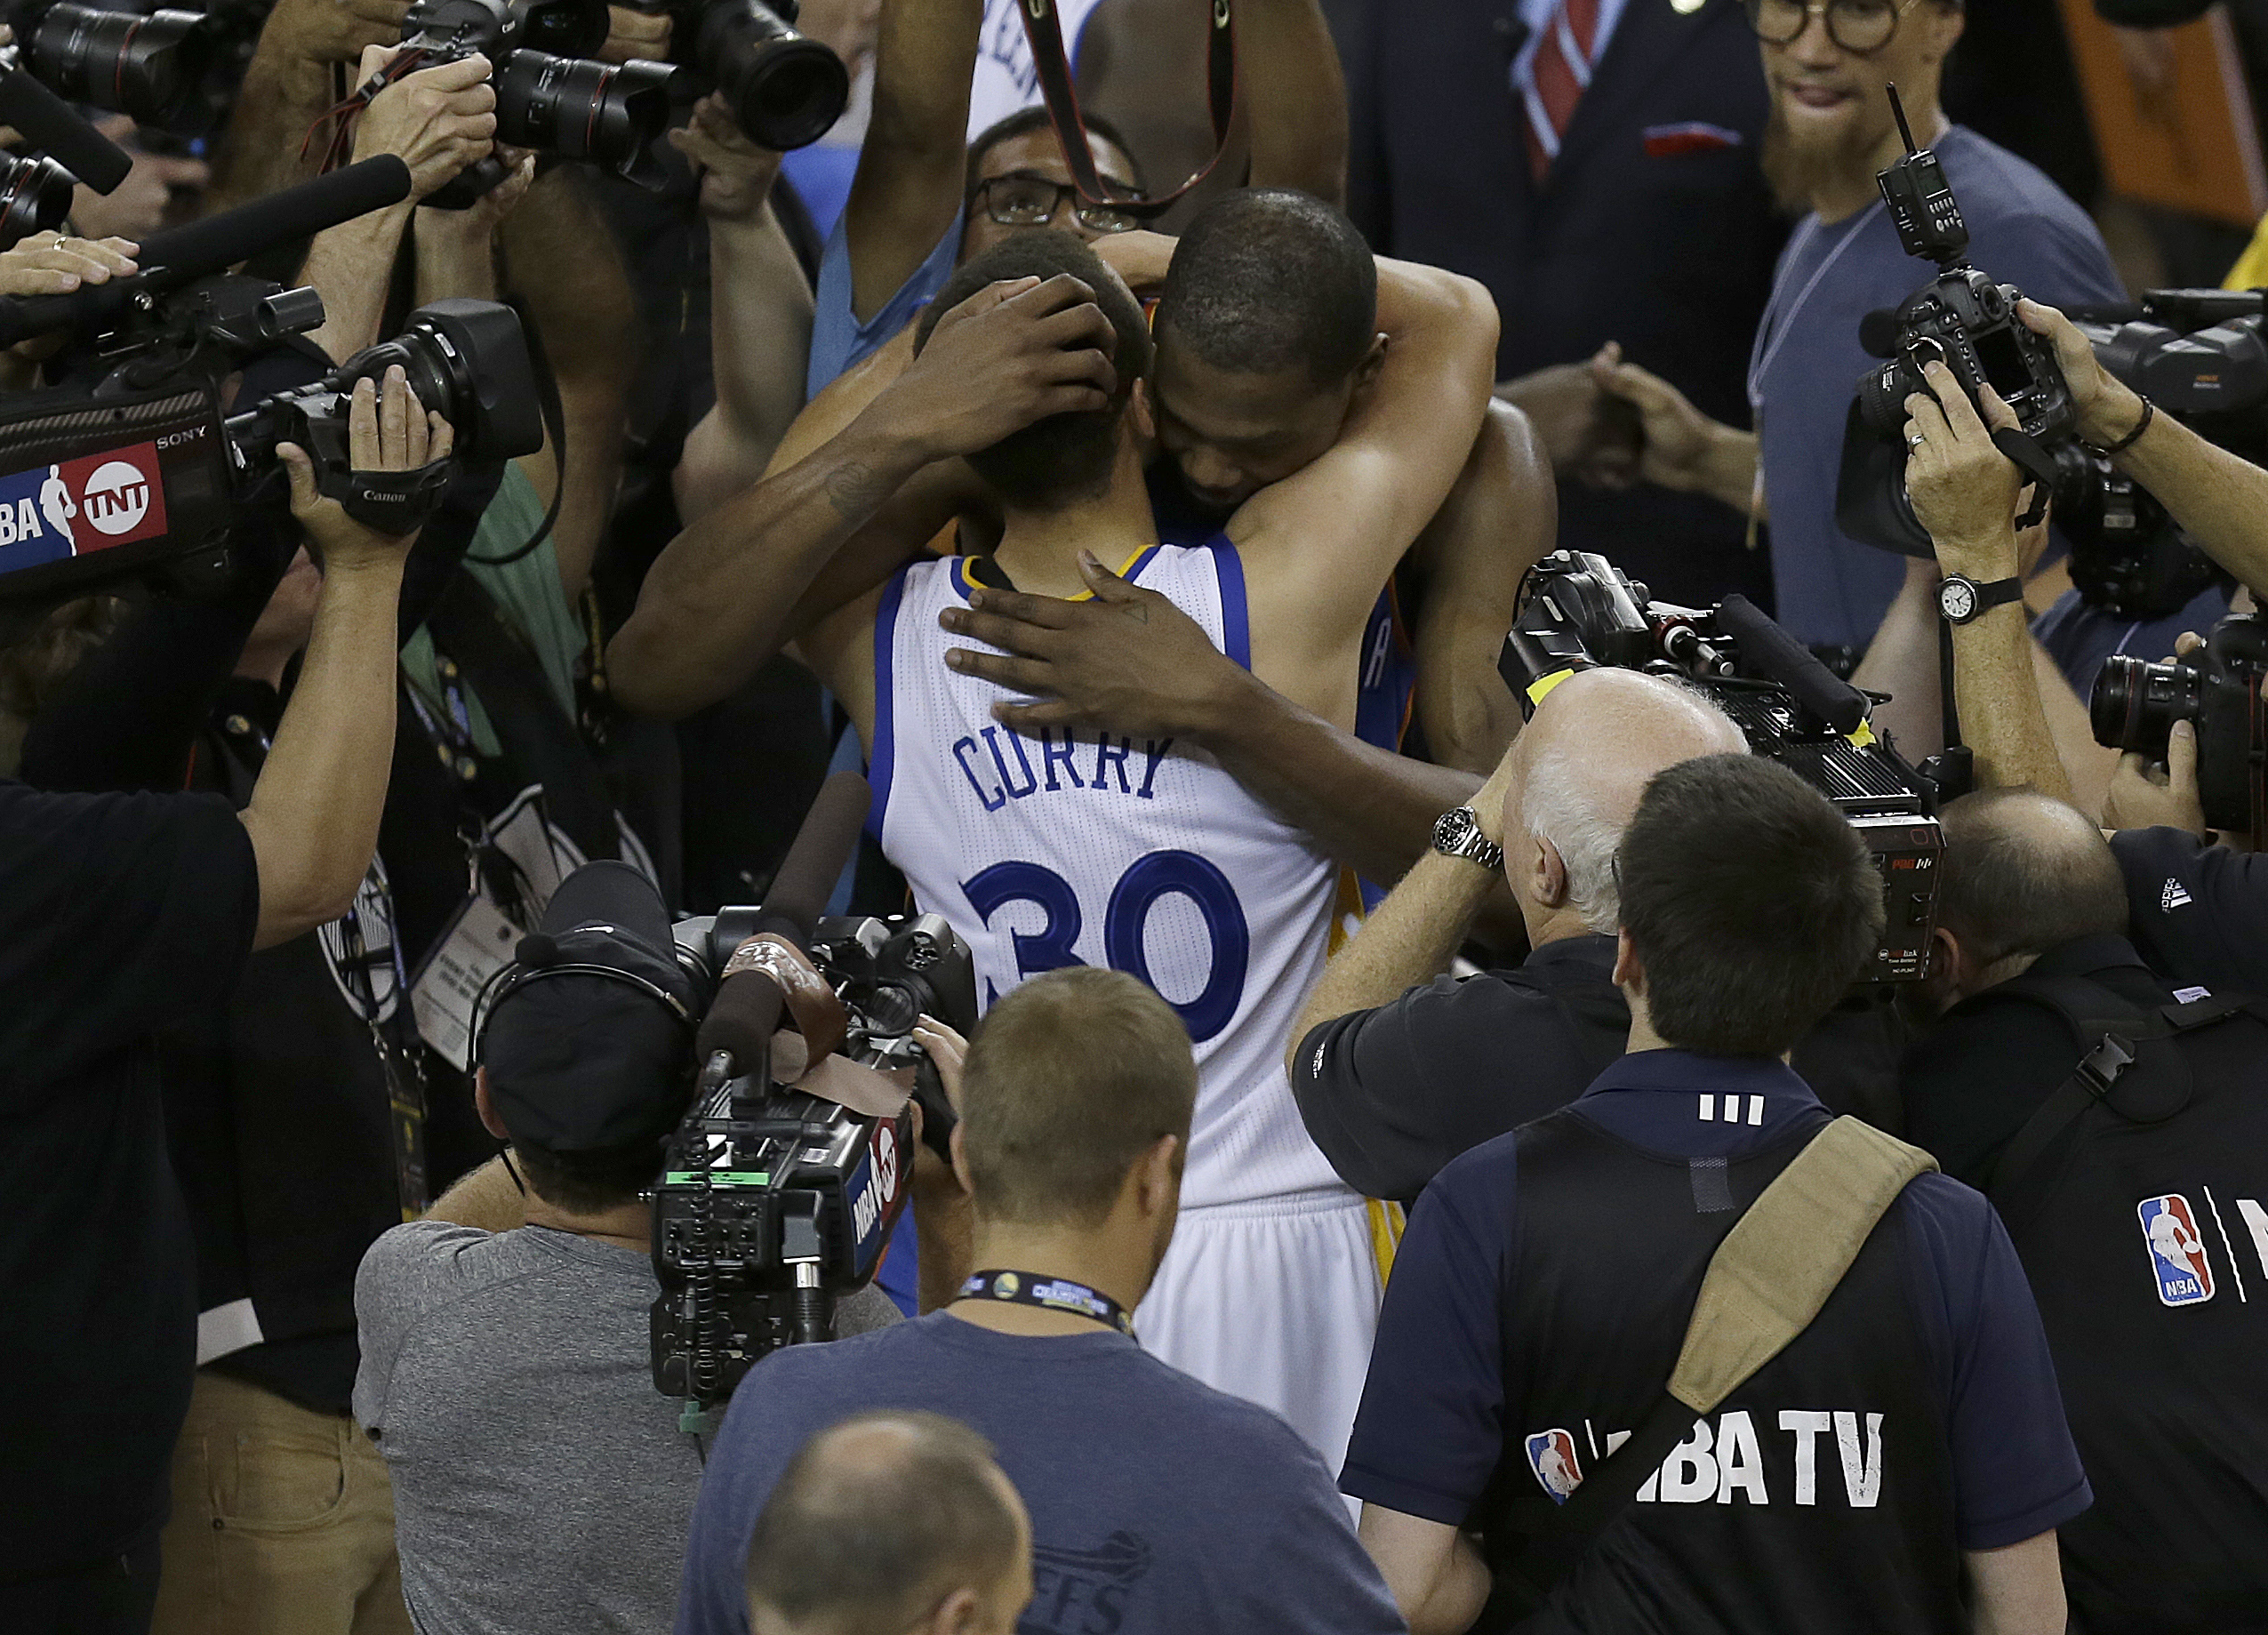 Golden State Warriors guard Stephen Curry (30) hugs Oklahoma City Thunder forward Kevin Durant after Game 7 of the NBA basketball Western Conference finals in Oakland, Calif., Monday, May 30, 2016. The Warriors won 96-88. (AP Photo/Ben Margot)